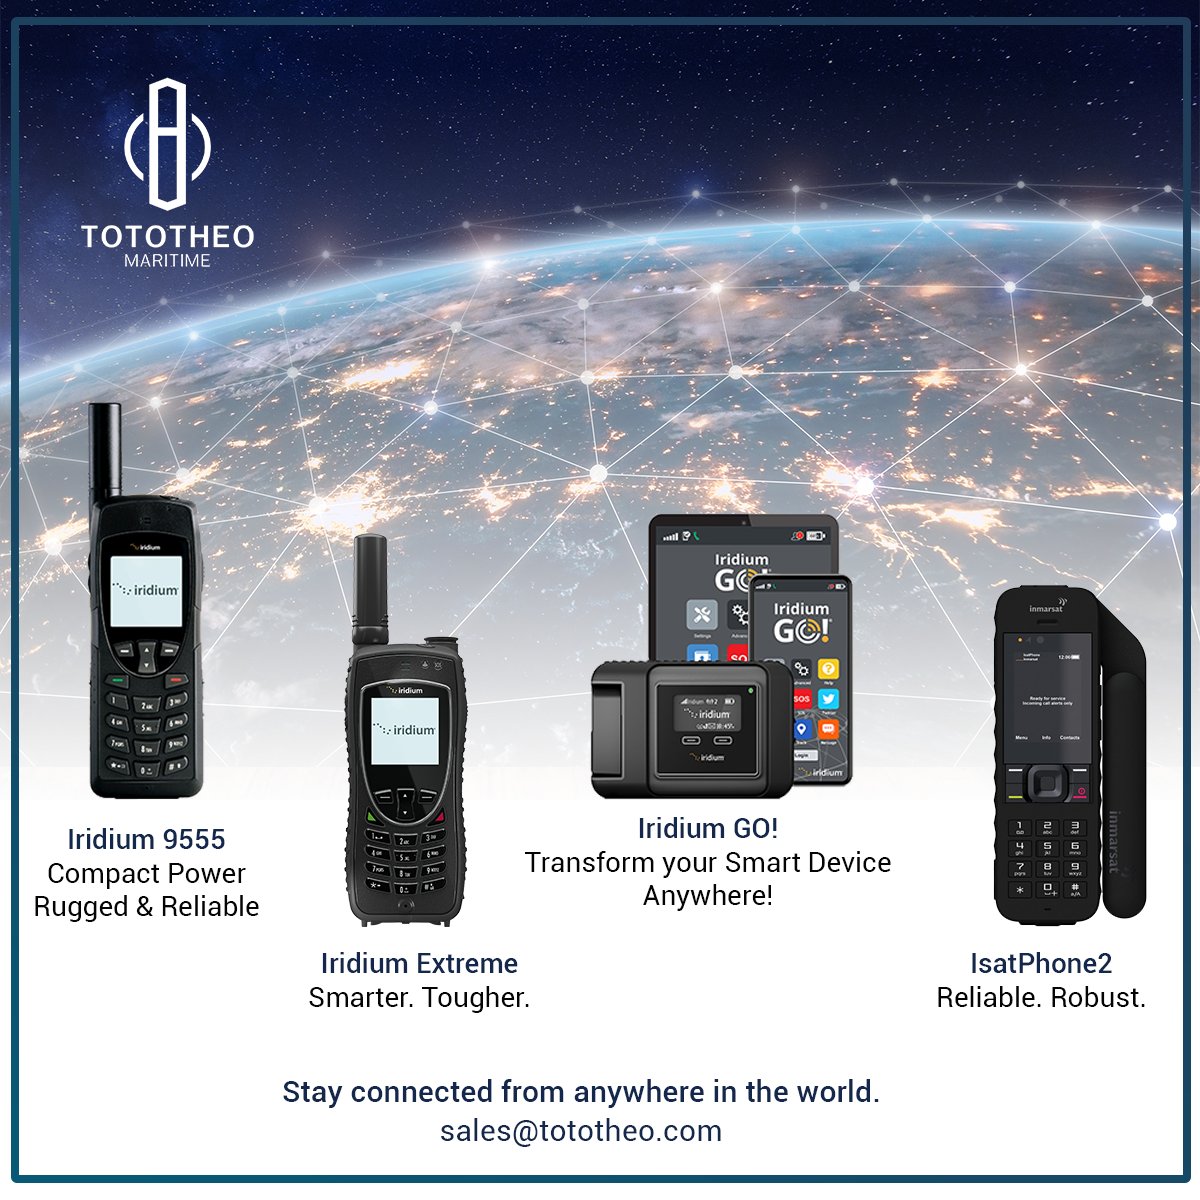 With high quality satellite devices, you can have reliable communication wherever you are.
#SatellitePhones #SatPhones  #satellitecommunications